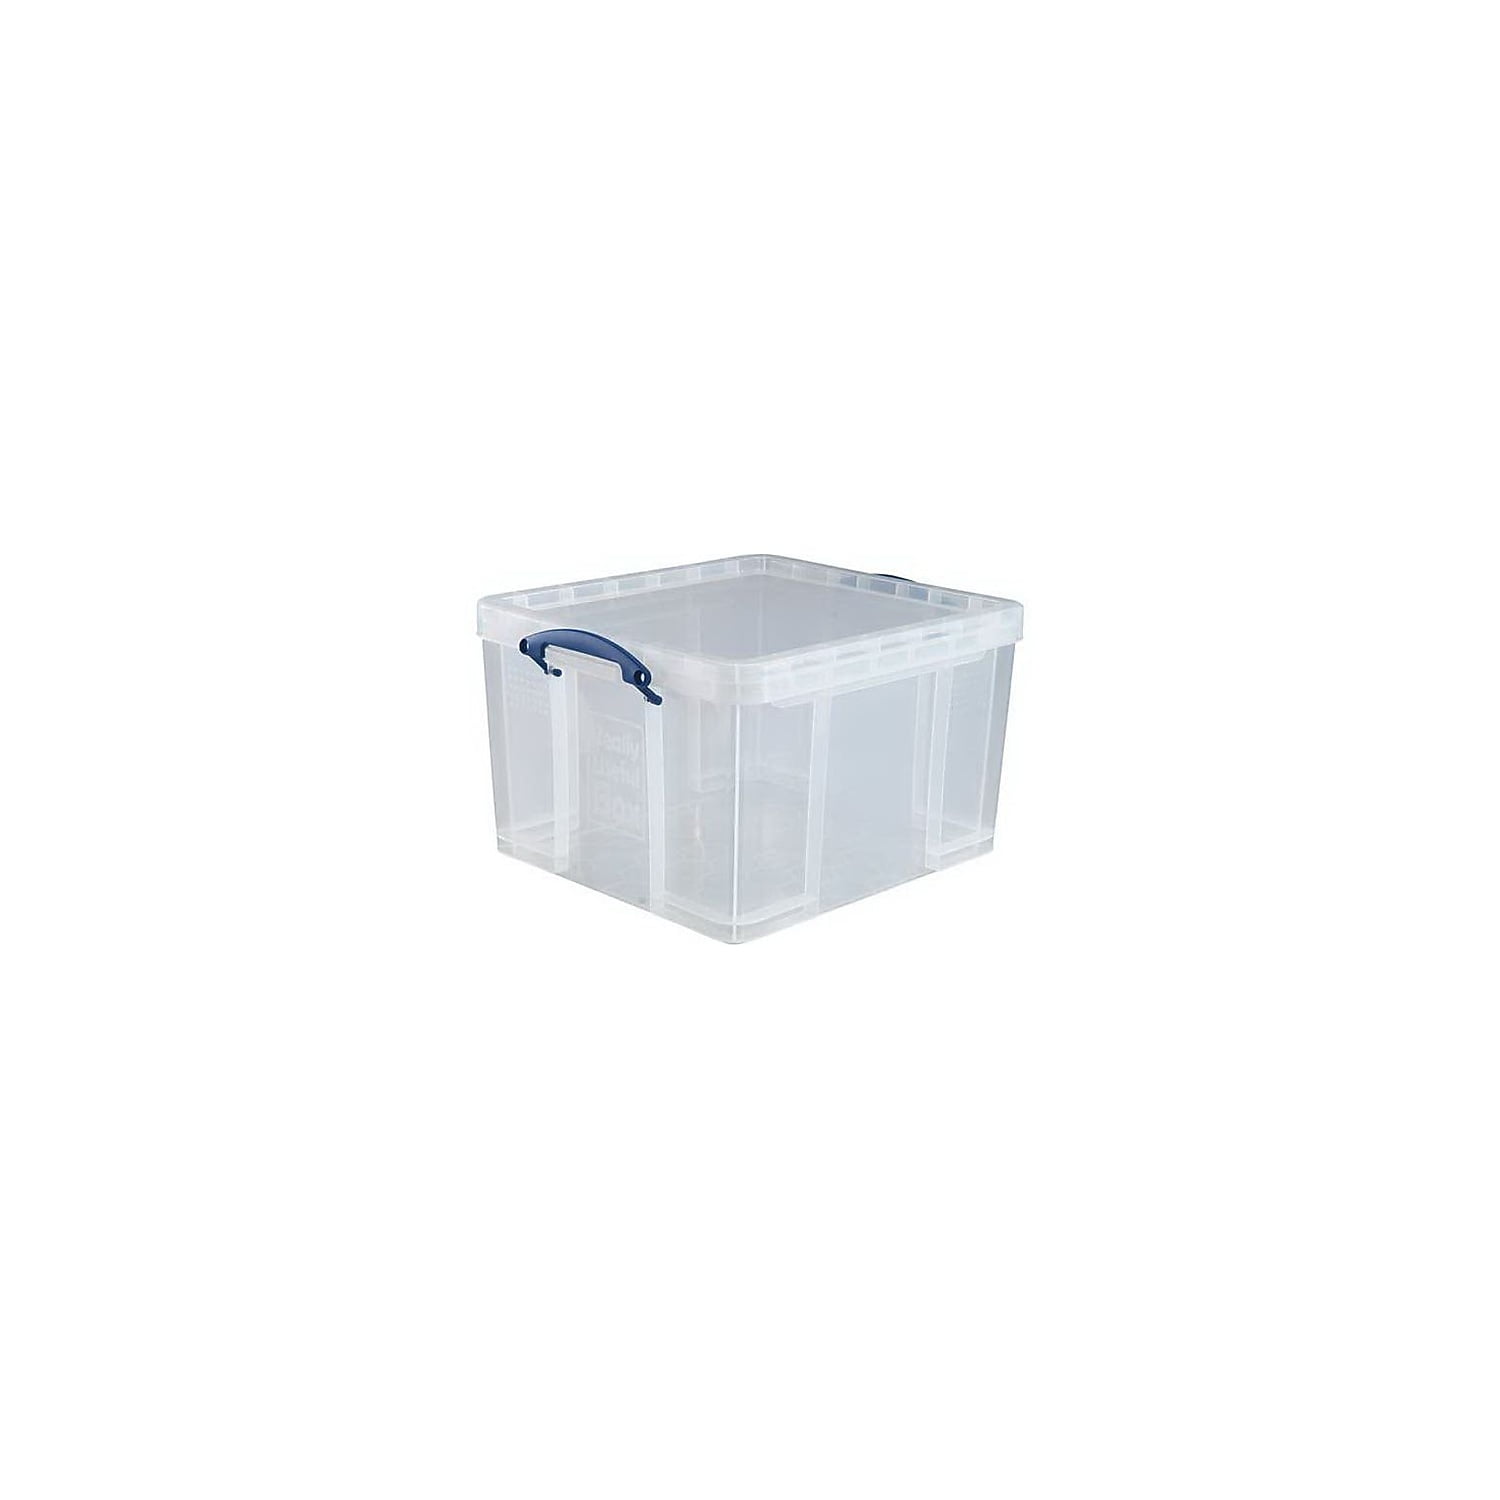 QUALITY PLASTIC STORAGE BOXES WITH CLEAR LIDS OFFICE HOME GARAGE STACKABLE UK 